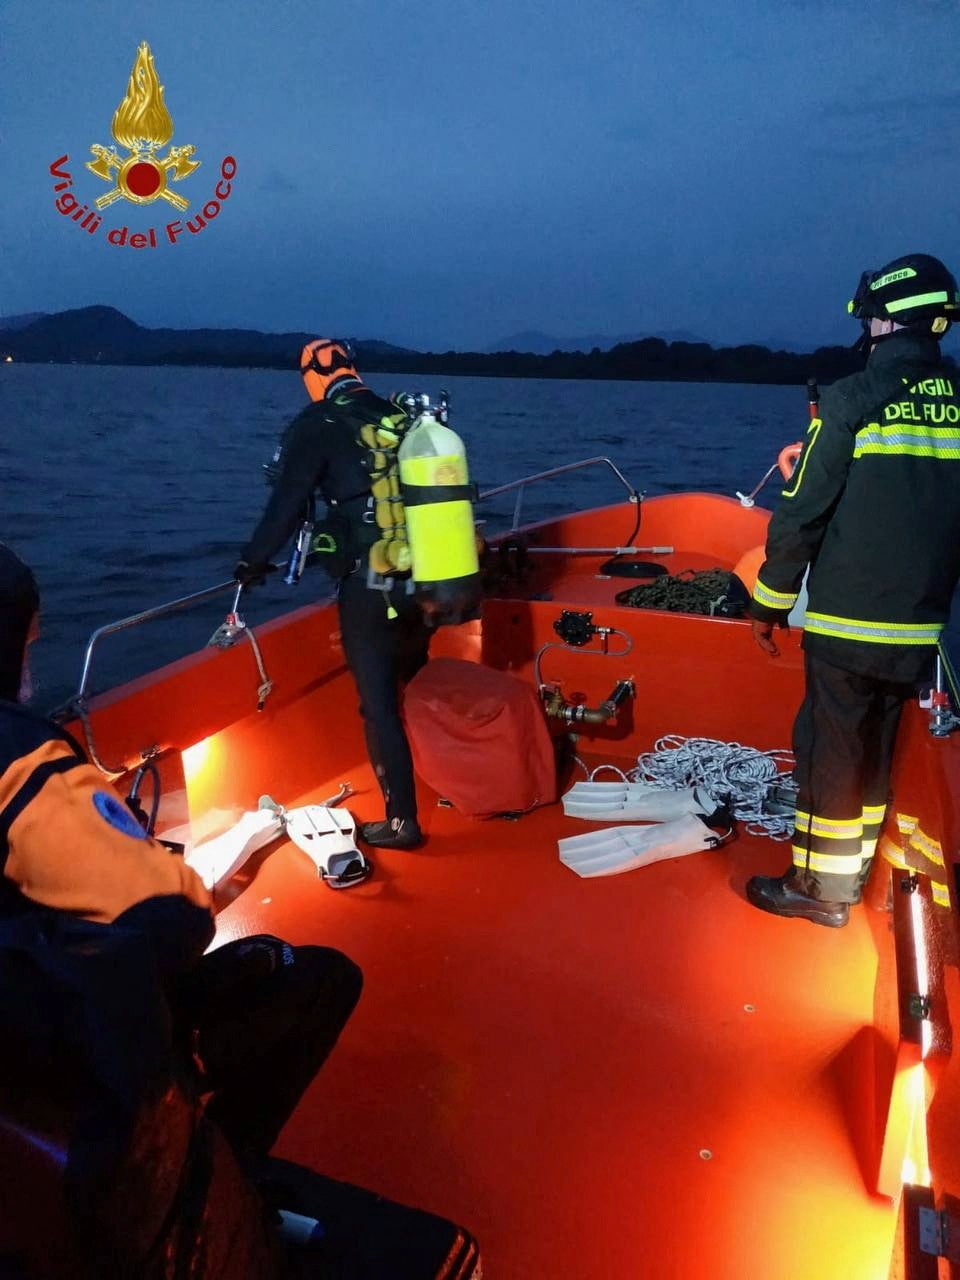 Firefighters search for survivors after the tourist boat capsized in Lake Maggiore